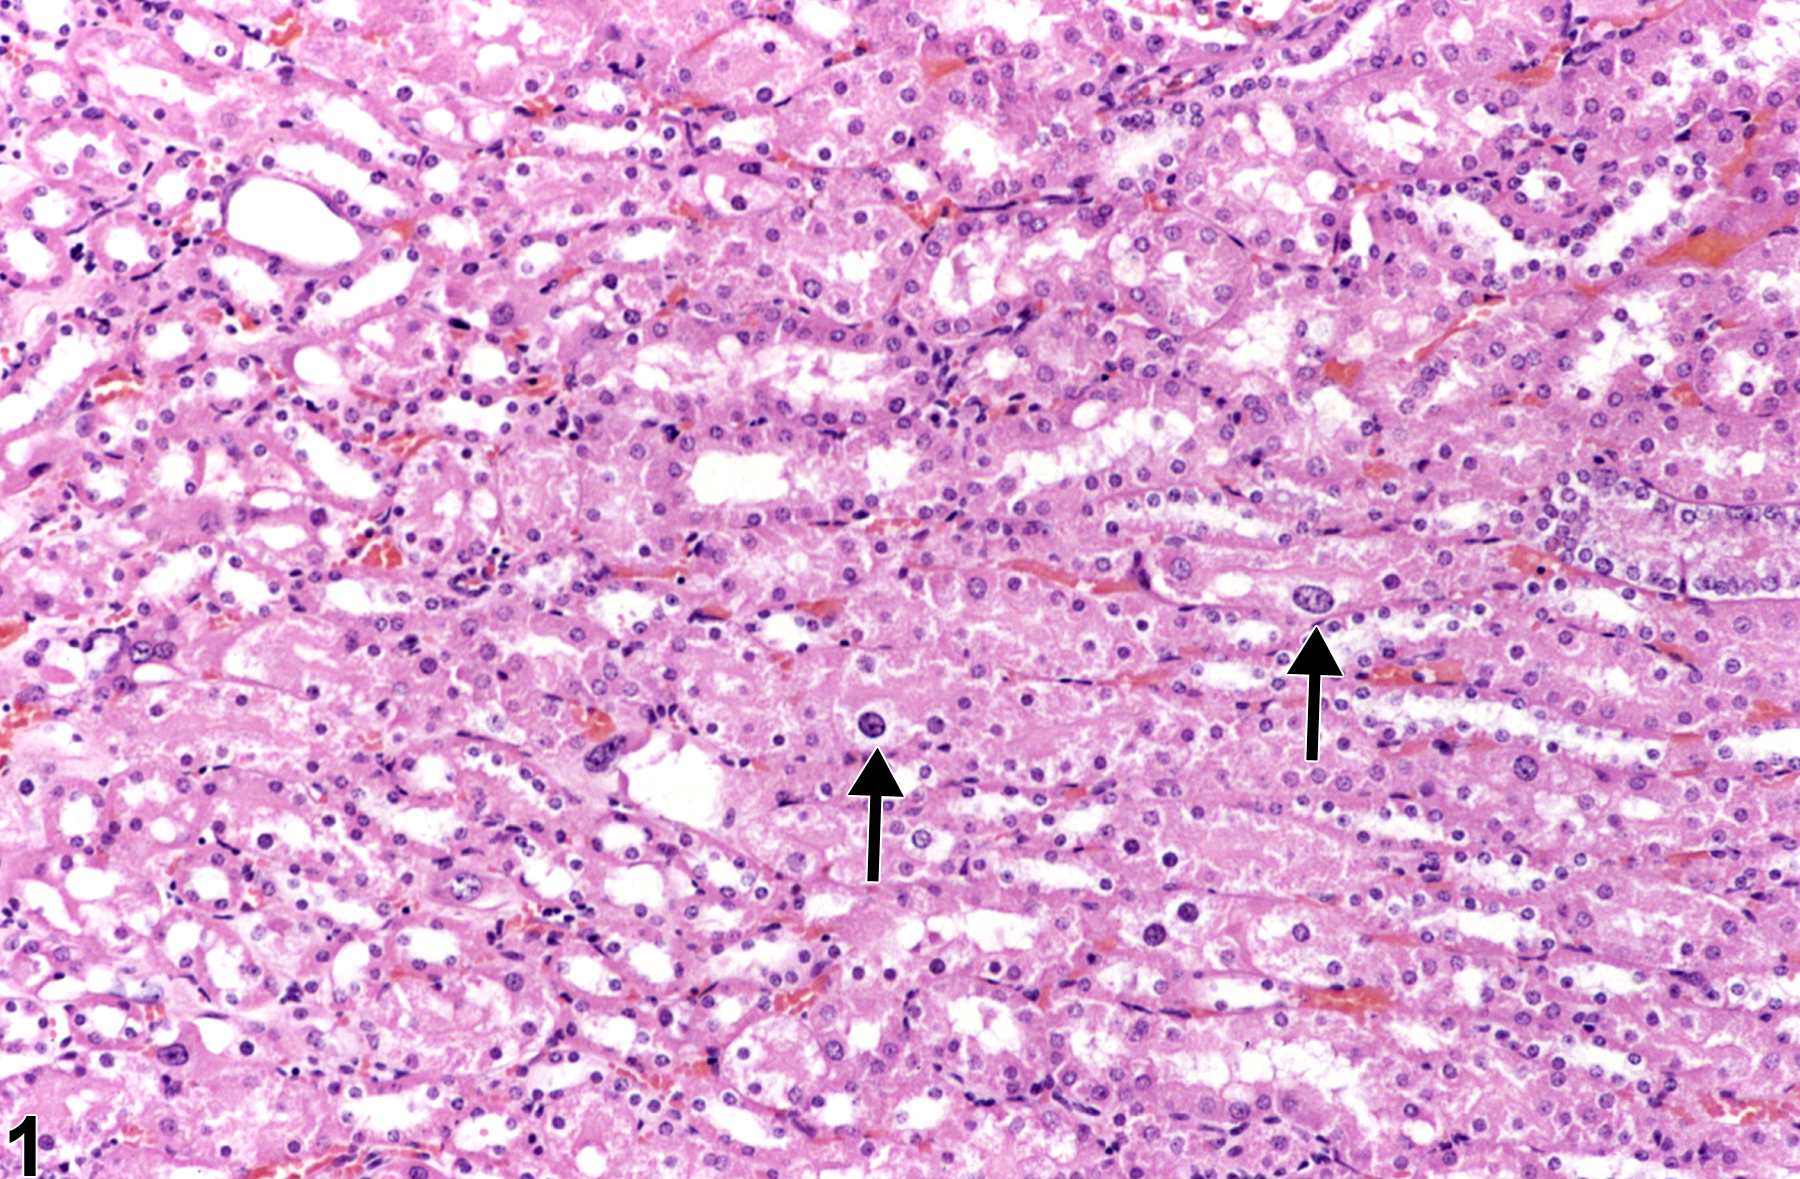 Image of karyomegaly in the kidney from a male B6C3F1 mouse in a chronic study